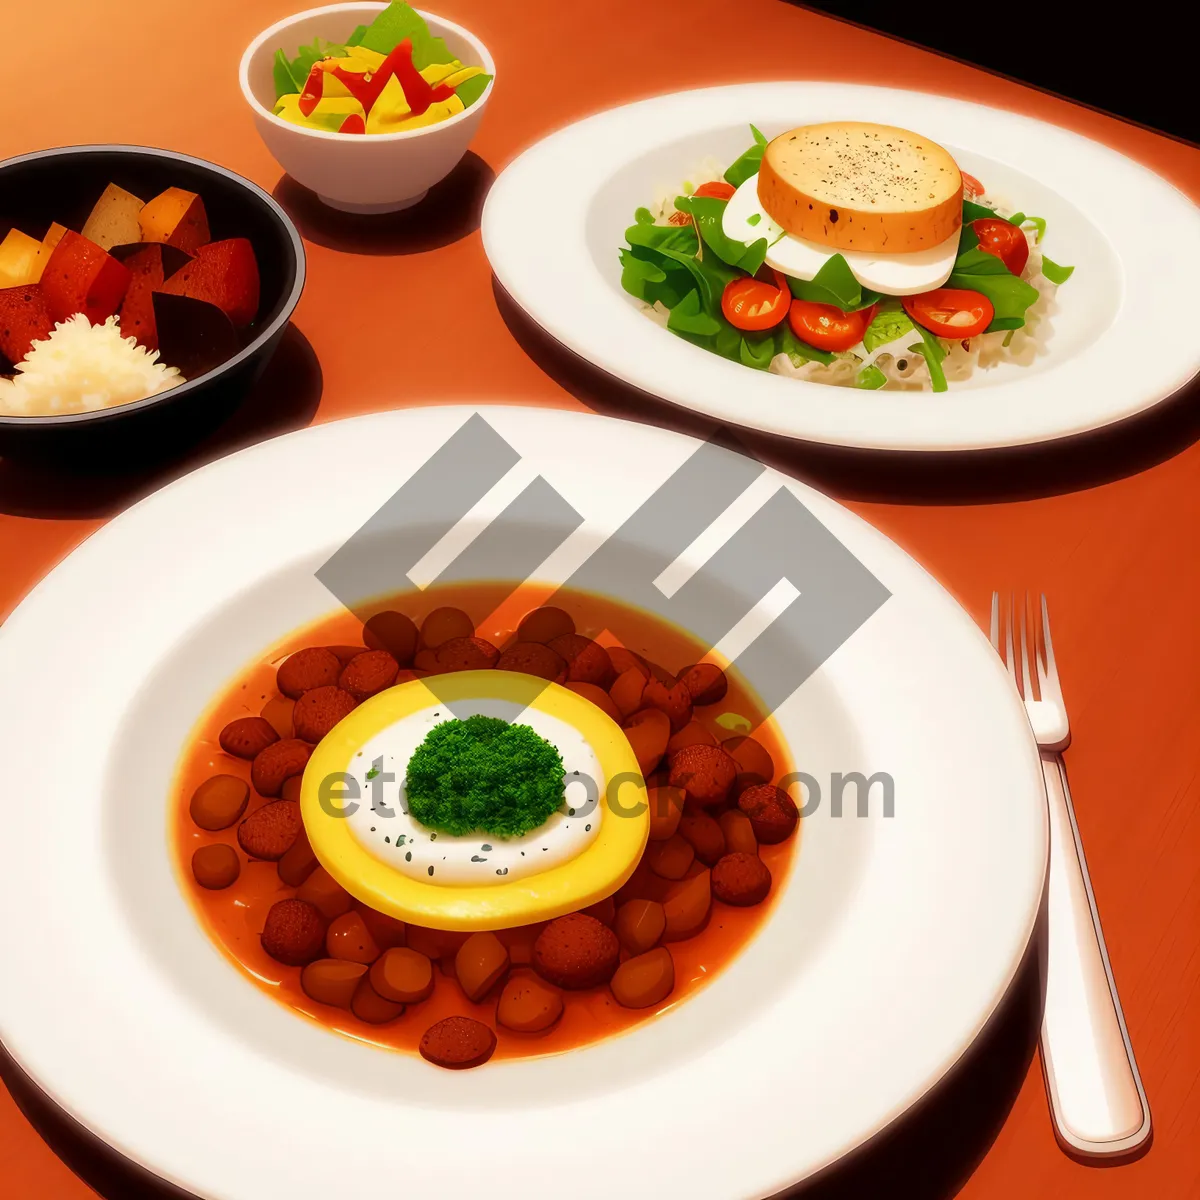 Picture of Delicious Gourmet Dinner Plate with Fresh Vegetables